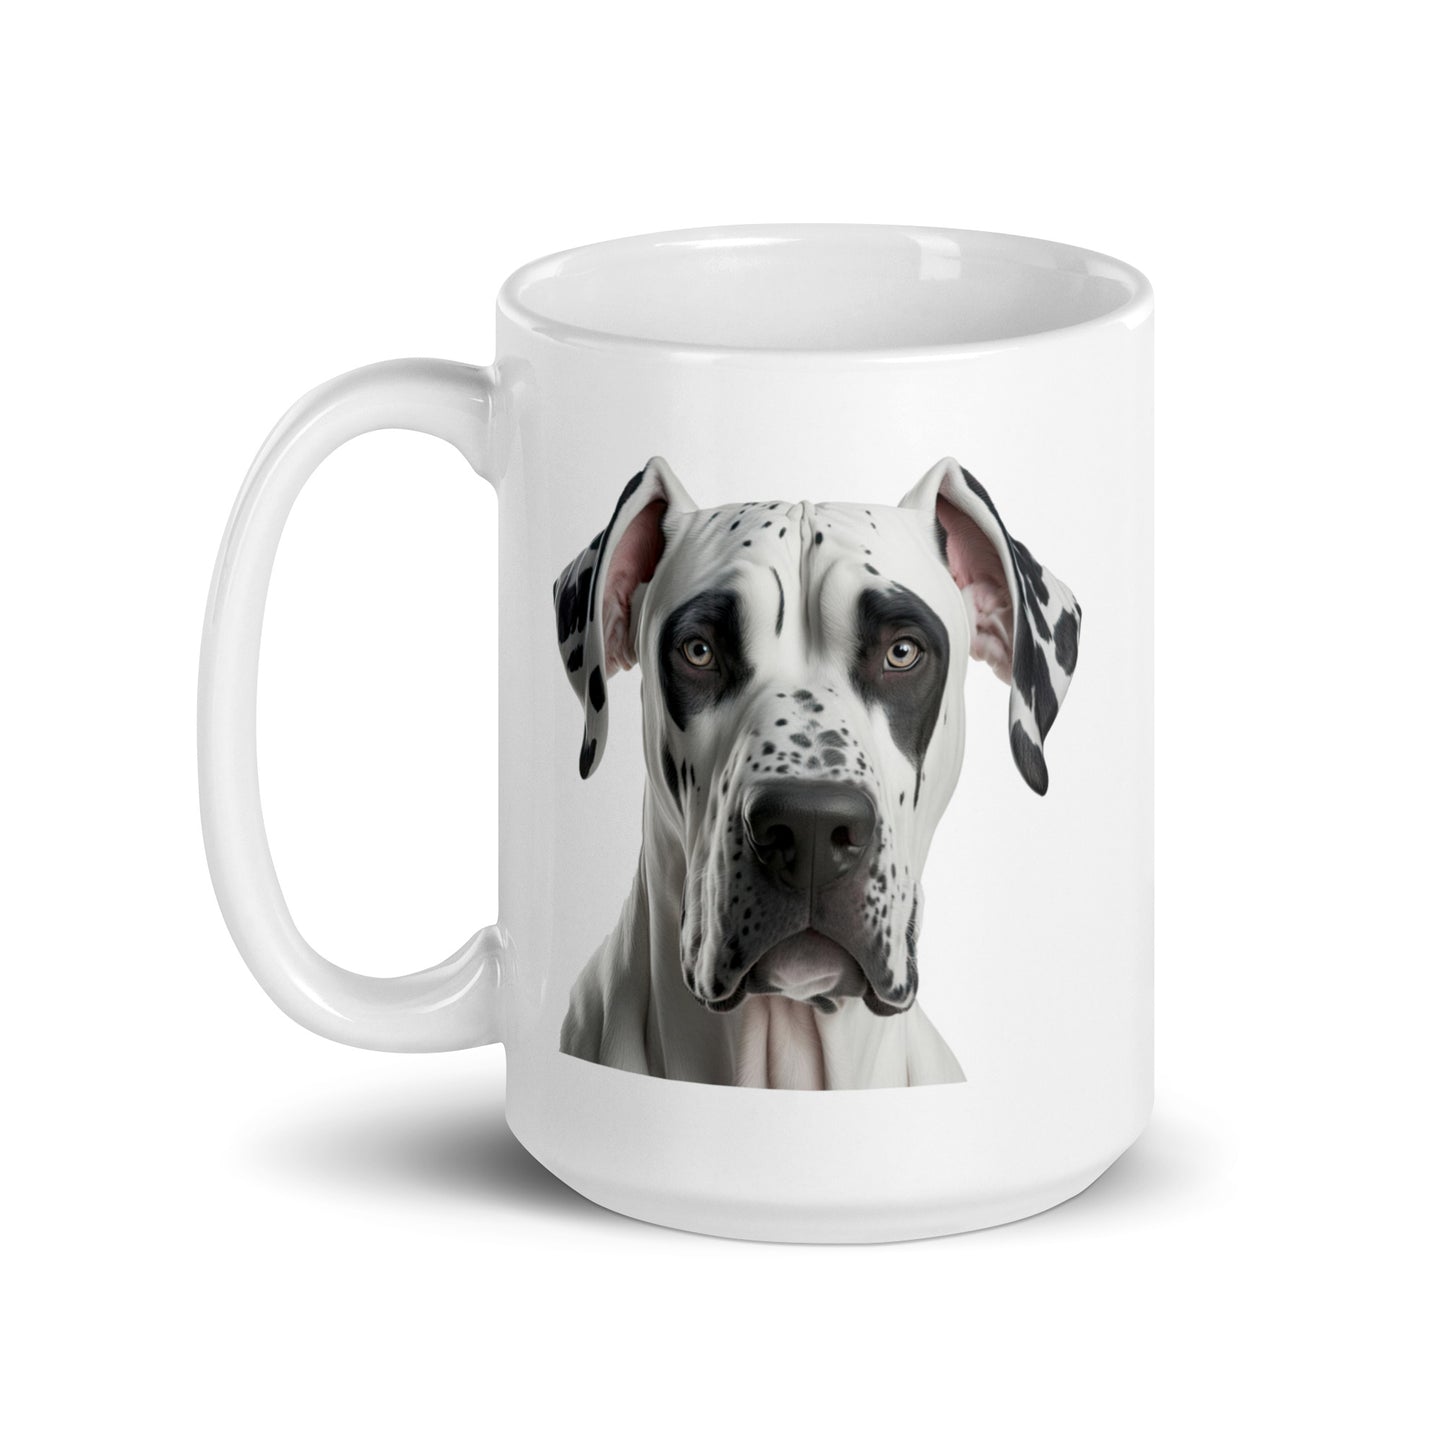 White Glossy Mug printed with a magnificent Great Dane